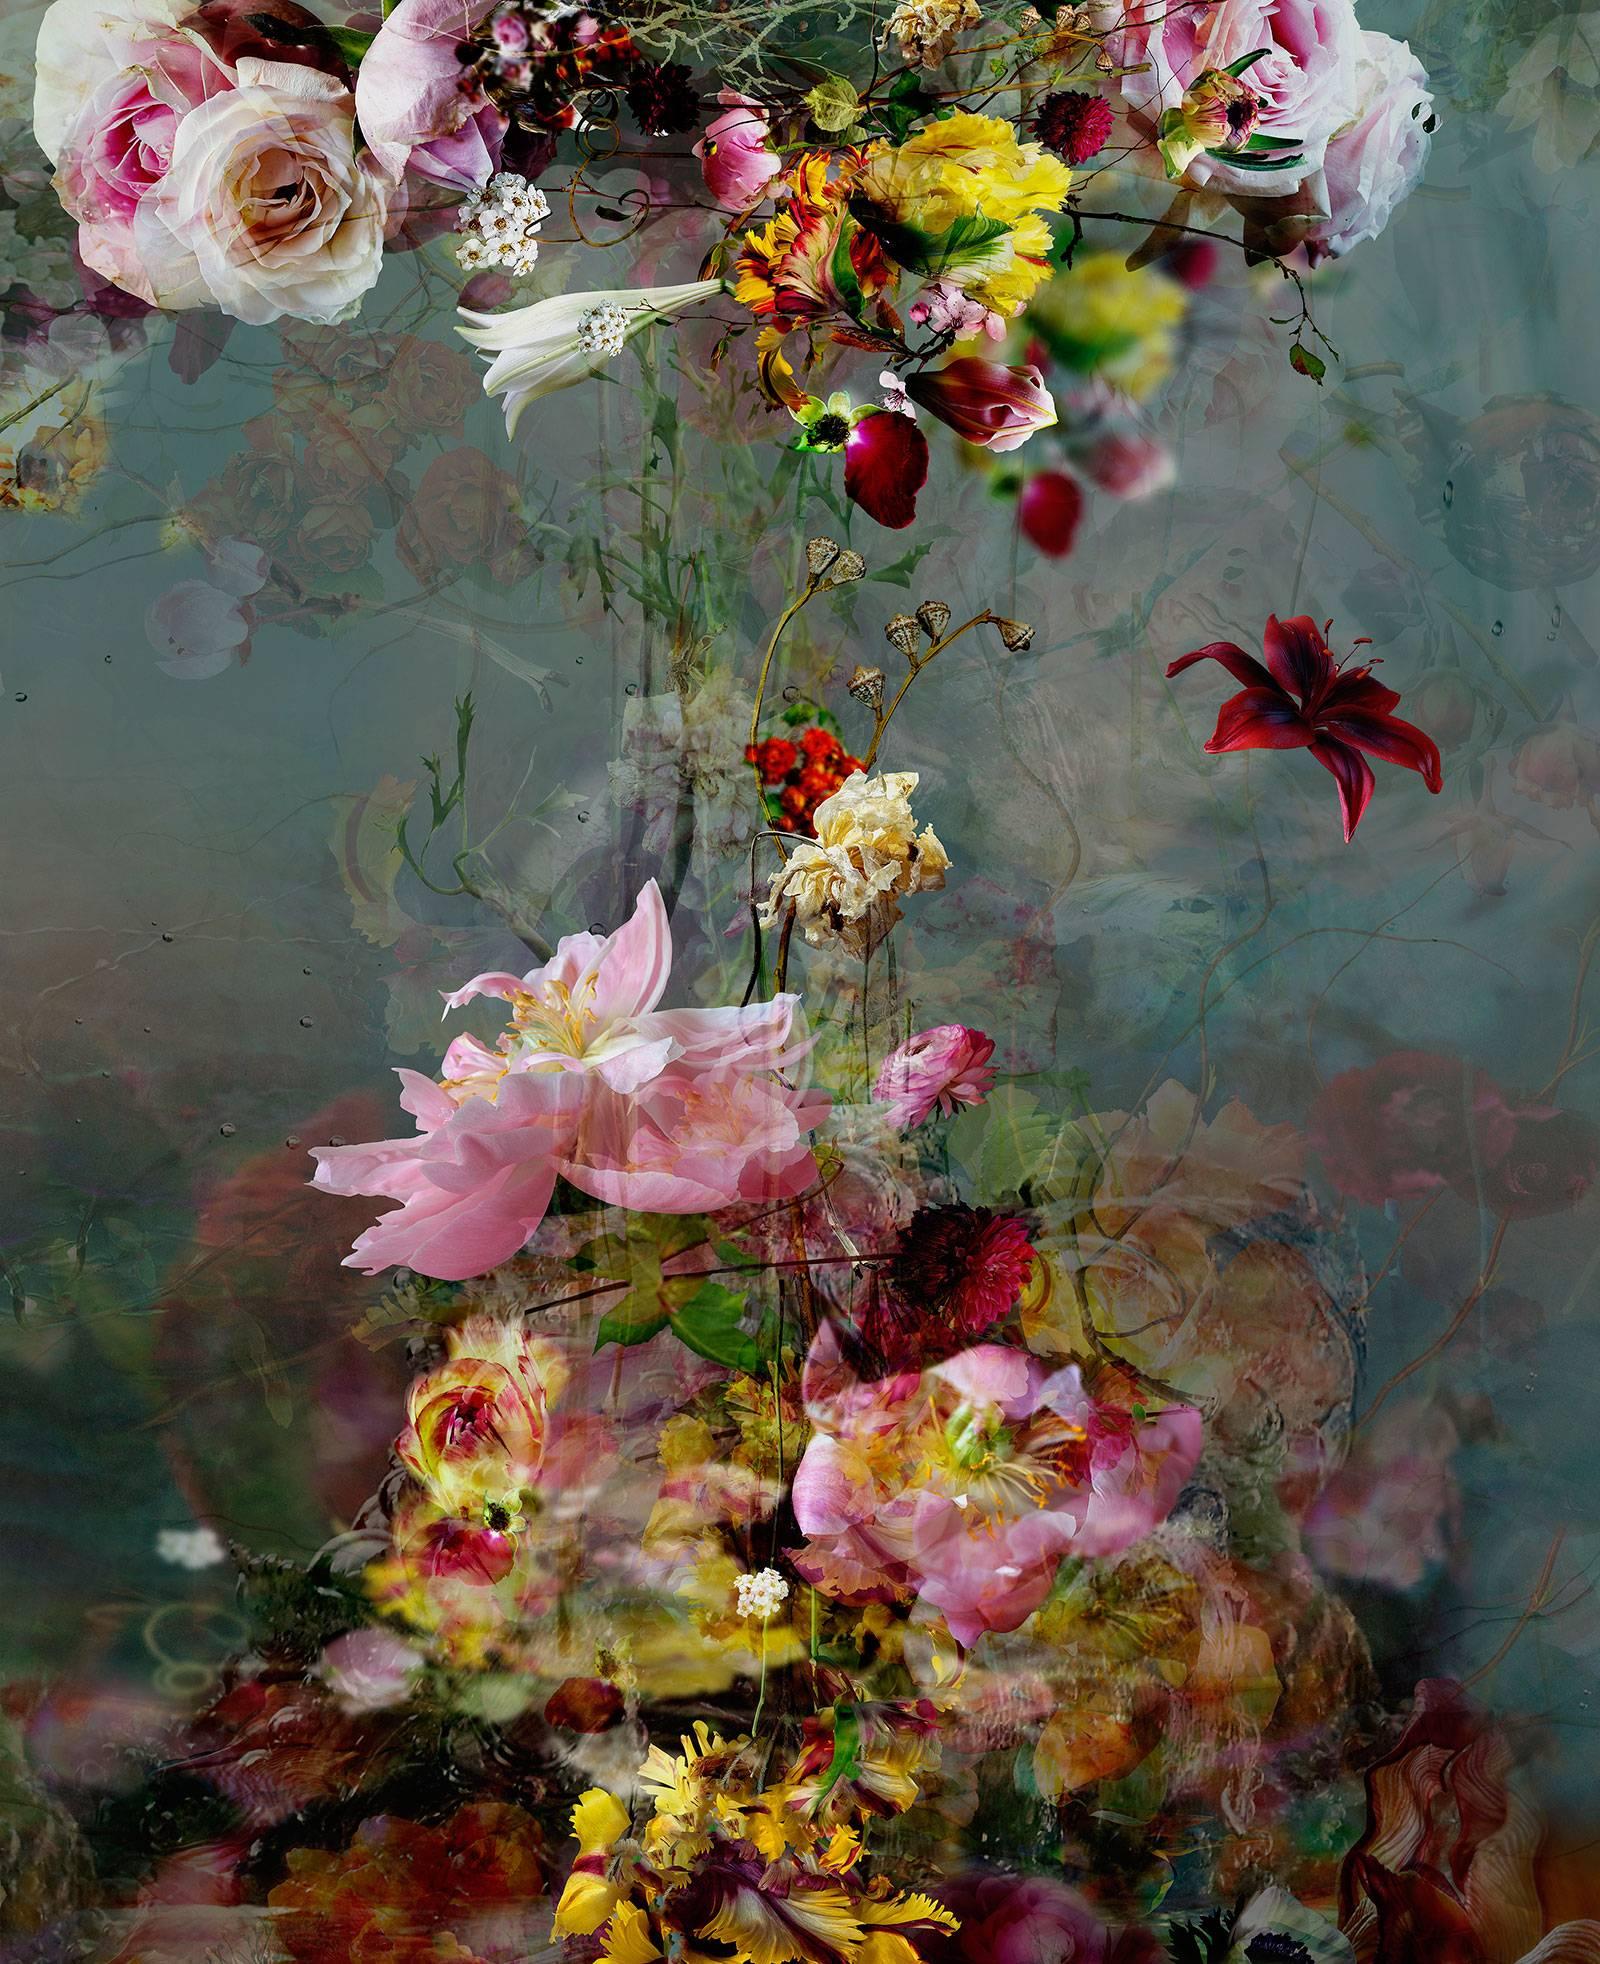 Isabelle Menin Still-Life Photograph - Sinking #2 - Floral abstract landscape colorful photograph